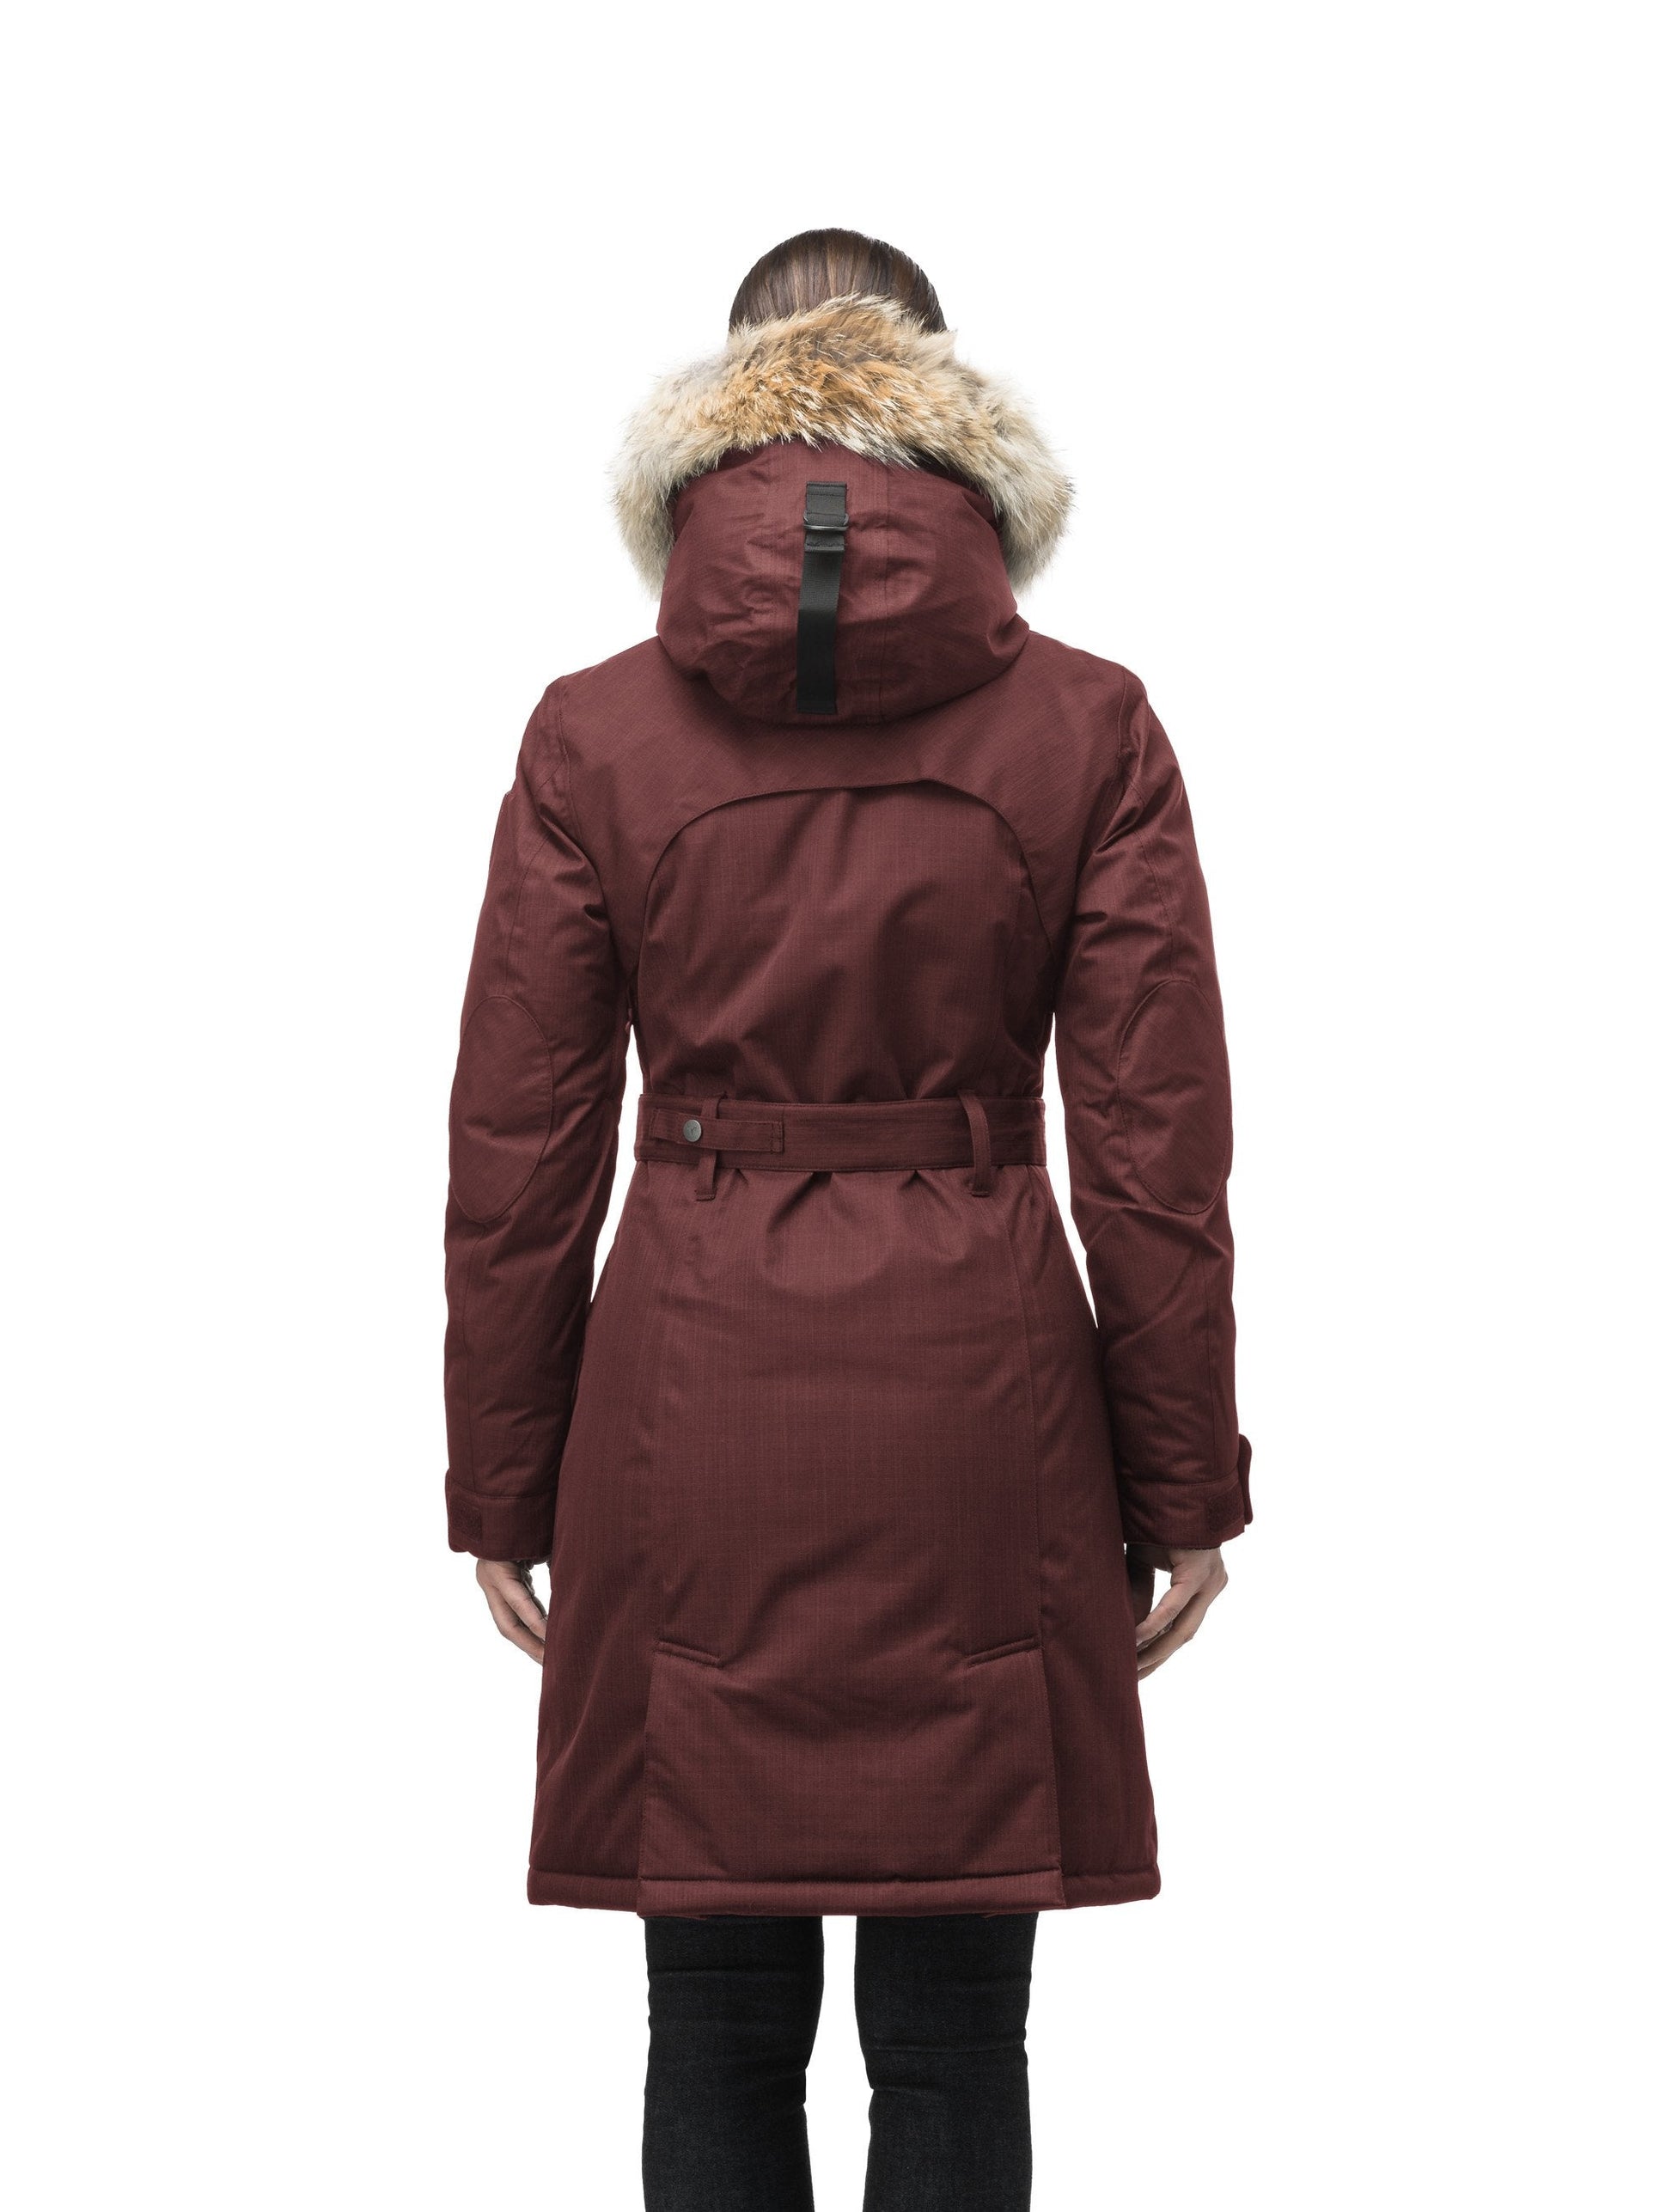 Women's down filled double breasted peacoat with a belted waist in CH Red Rum